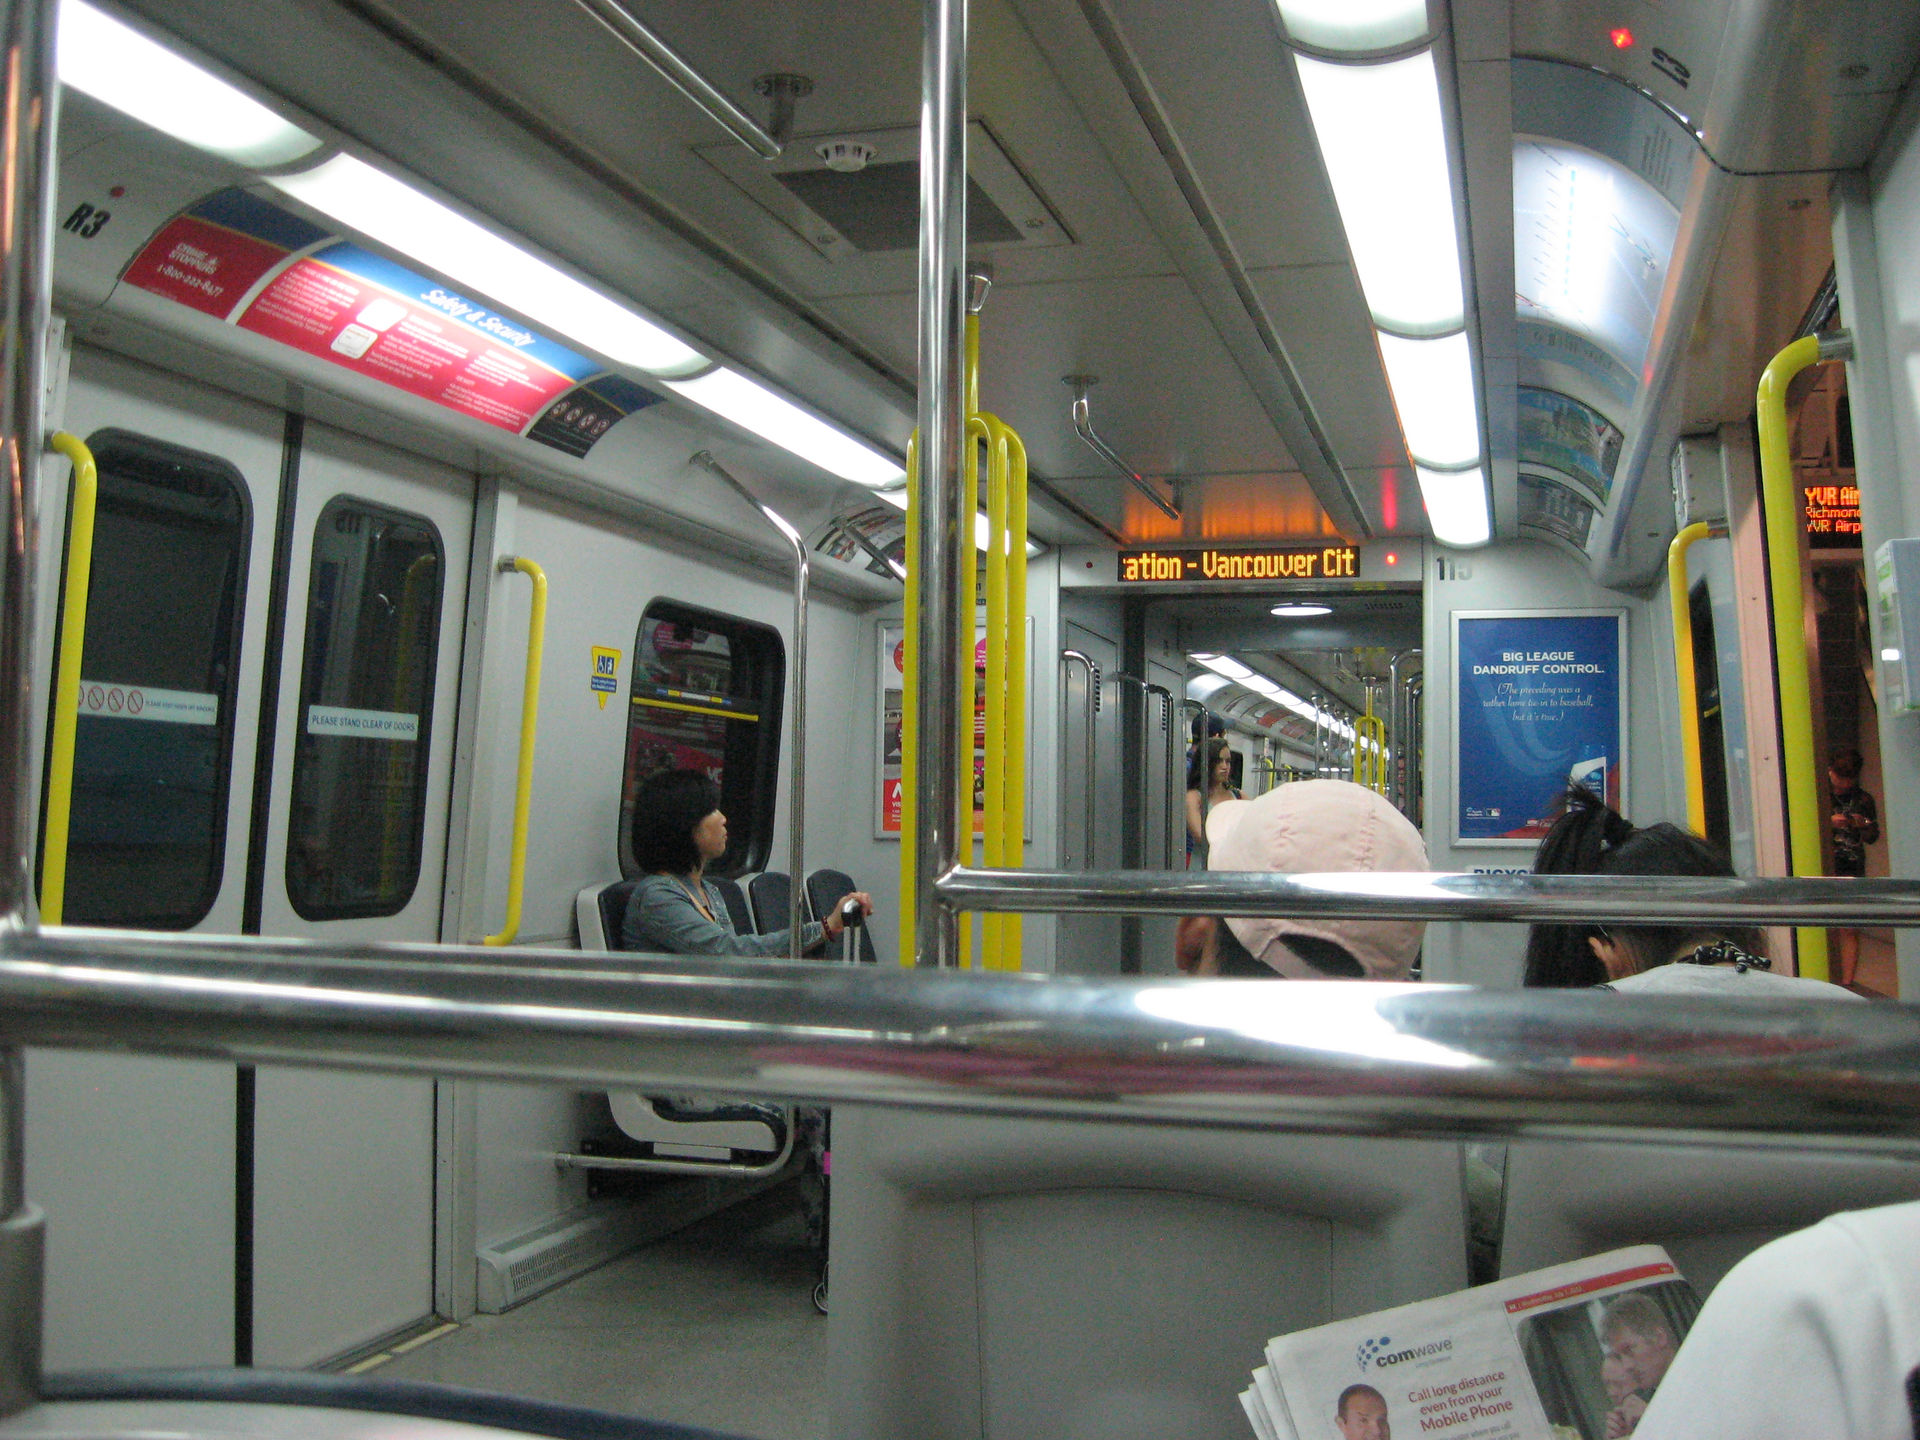 Inside the subway train on the Canada Line